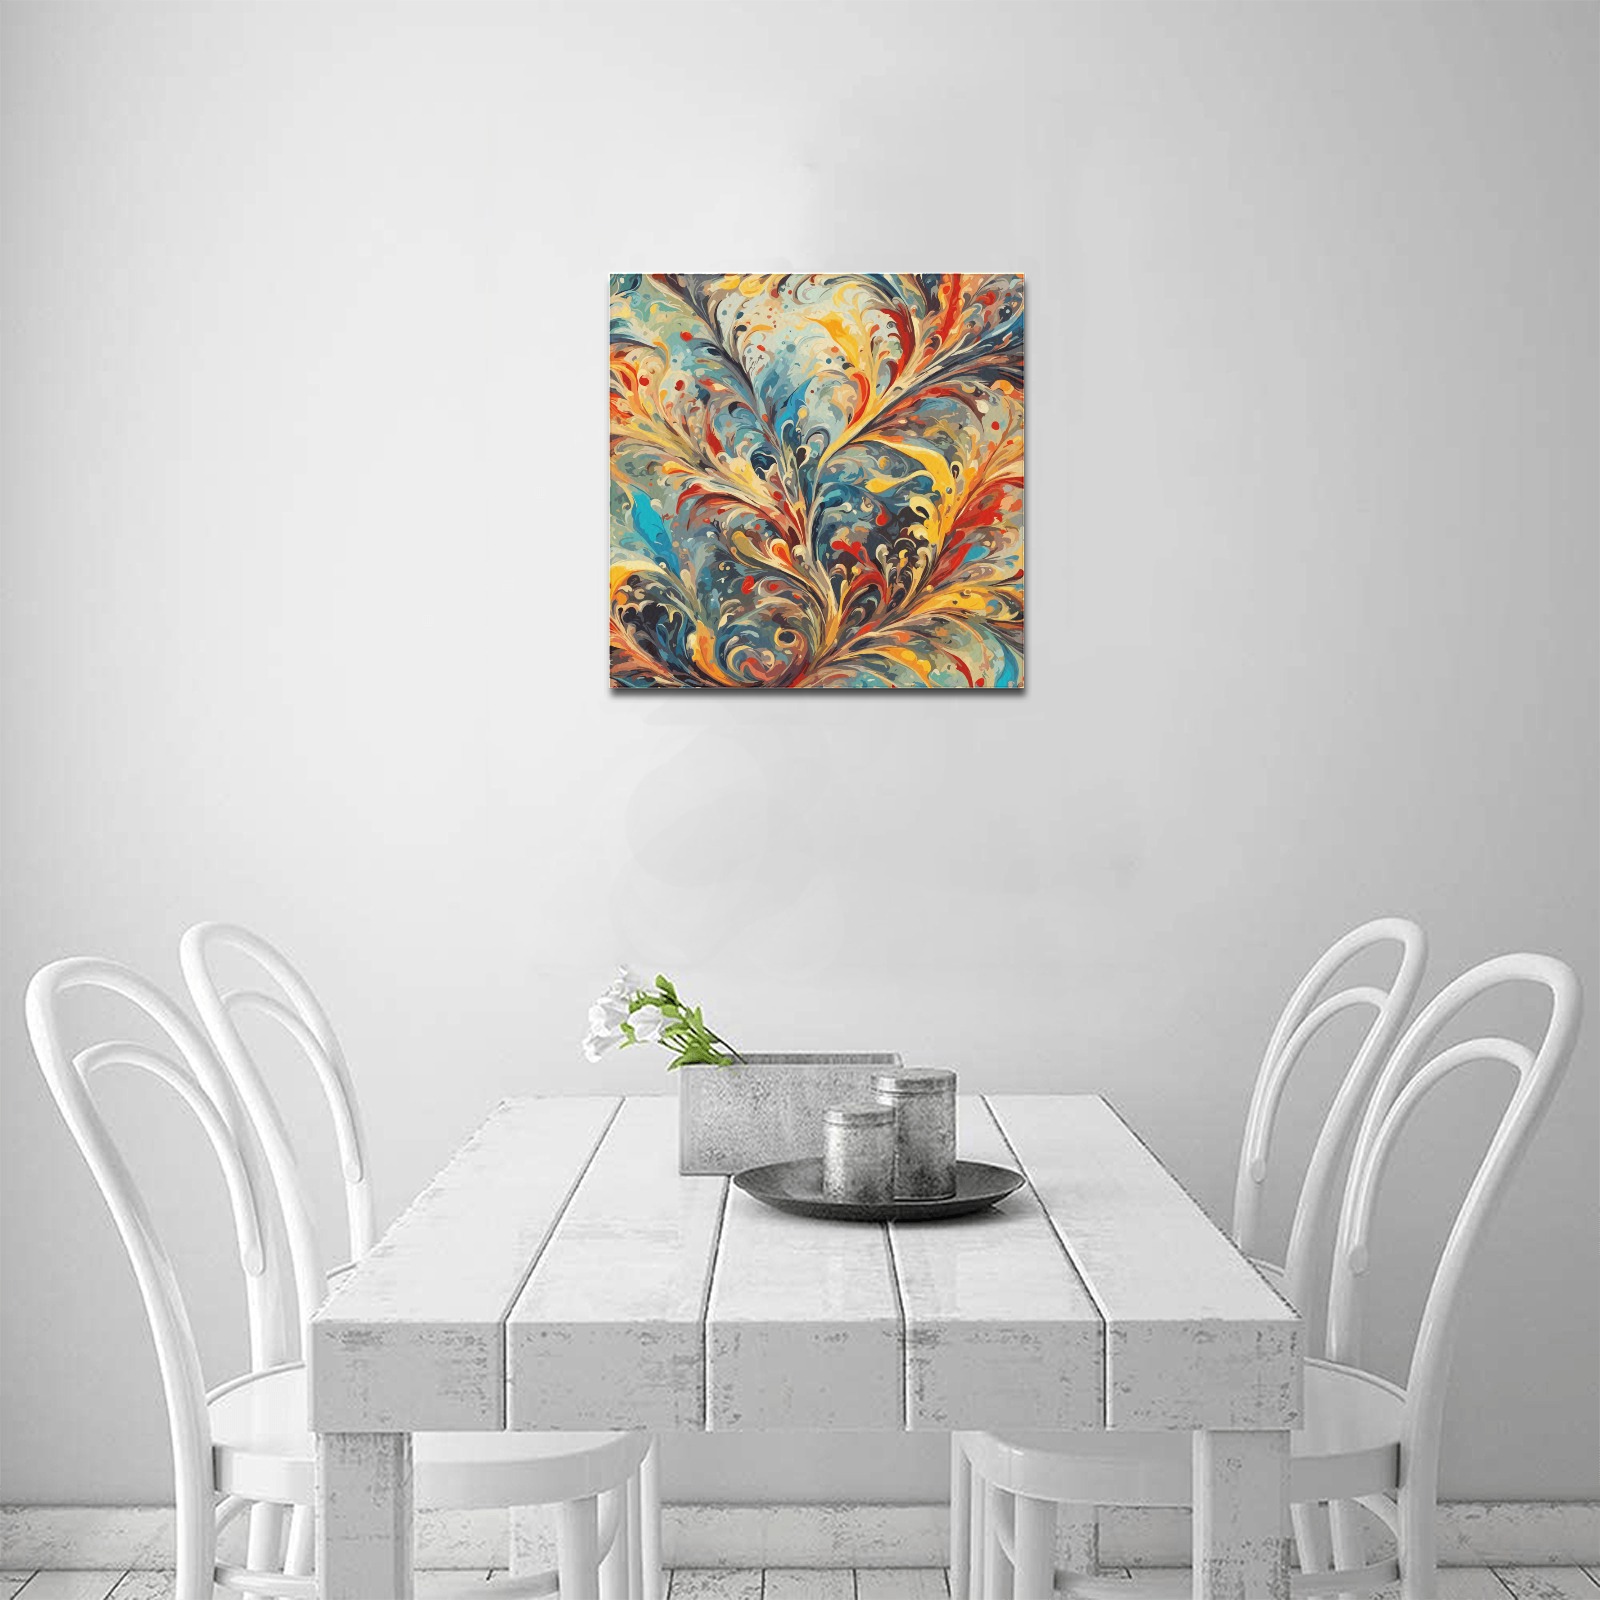 Stunning abstract floral ornament. Colorful art. Upgraded Canvas Print 16"x16"